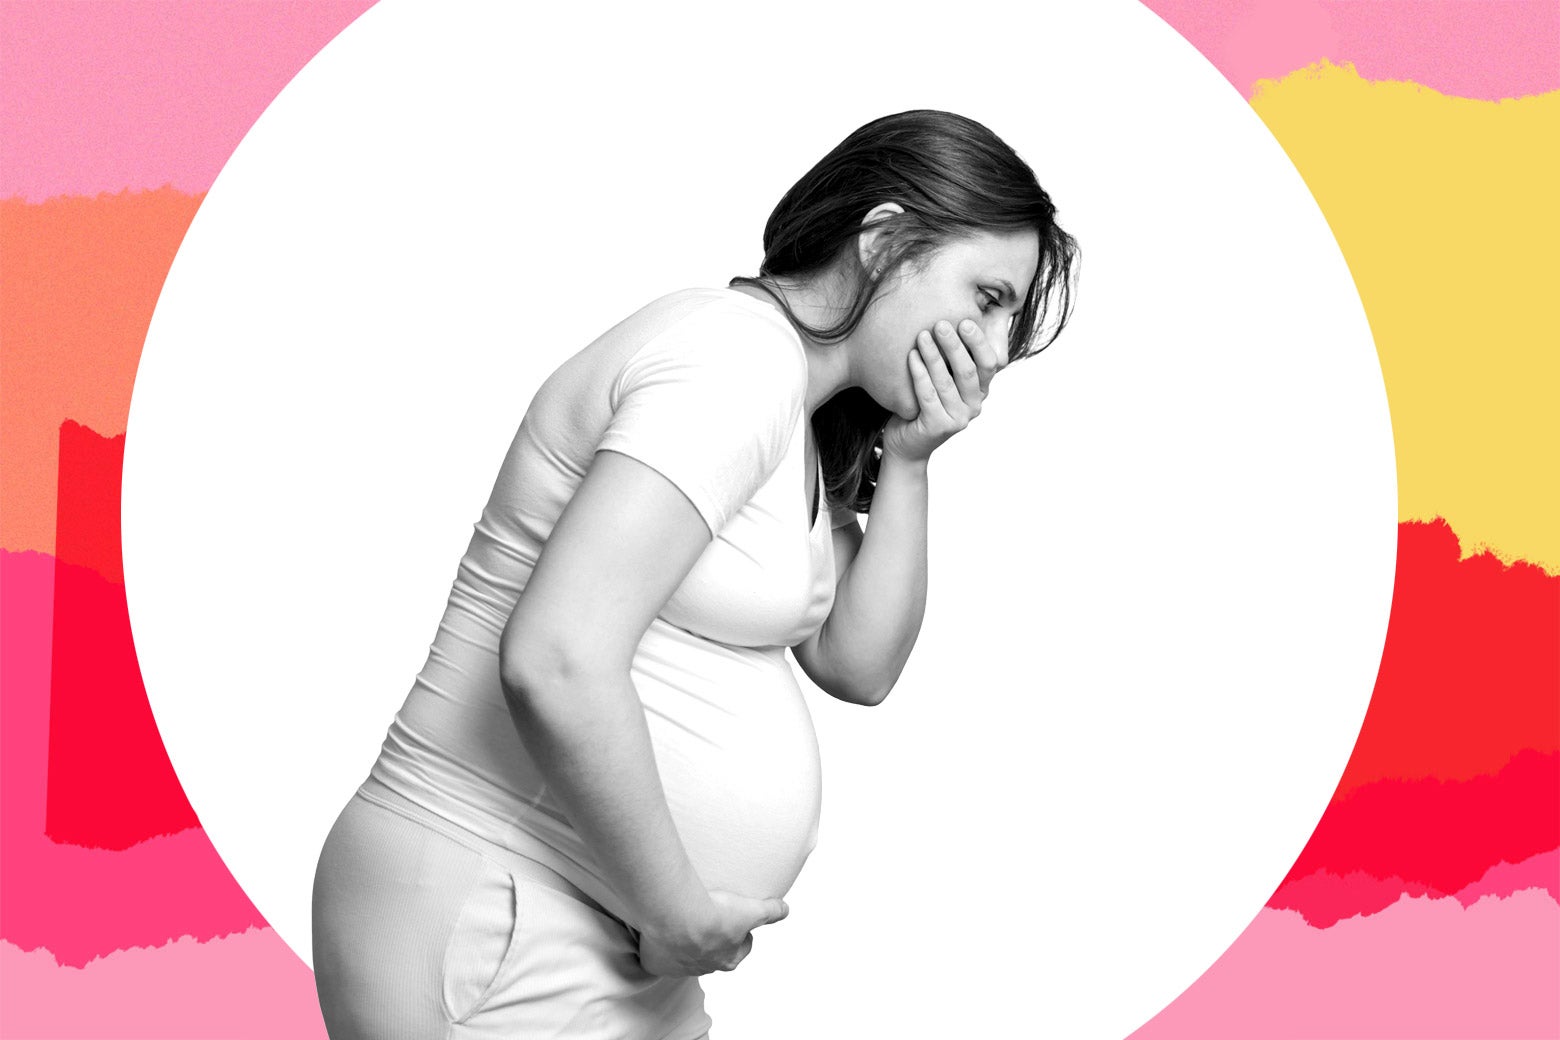 A pregnant person covers her mouth, as if sick.